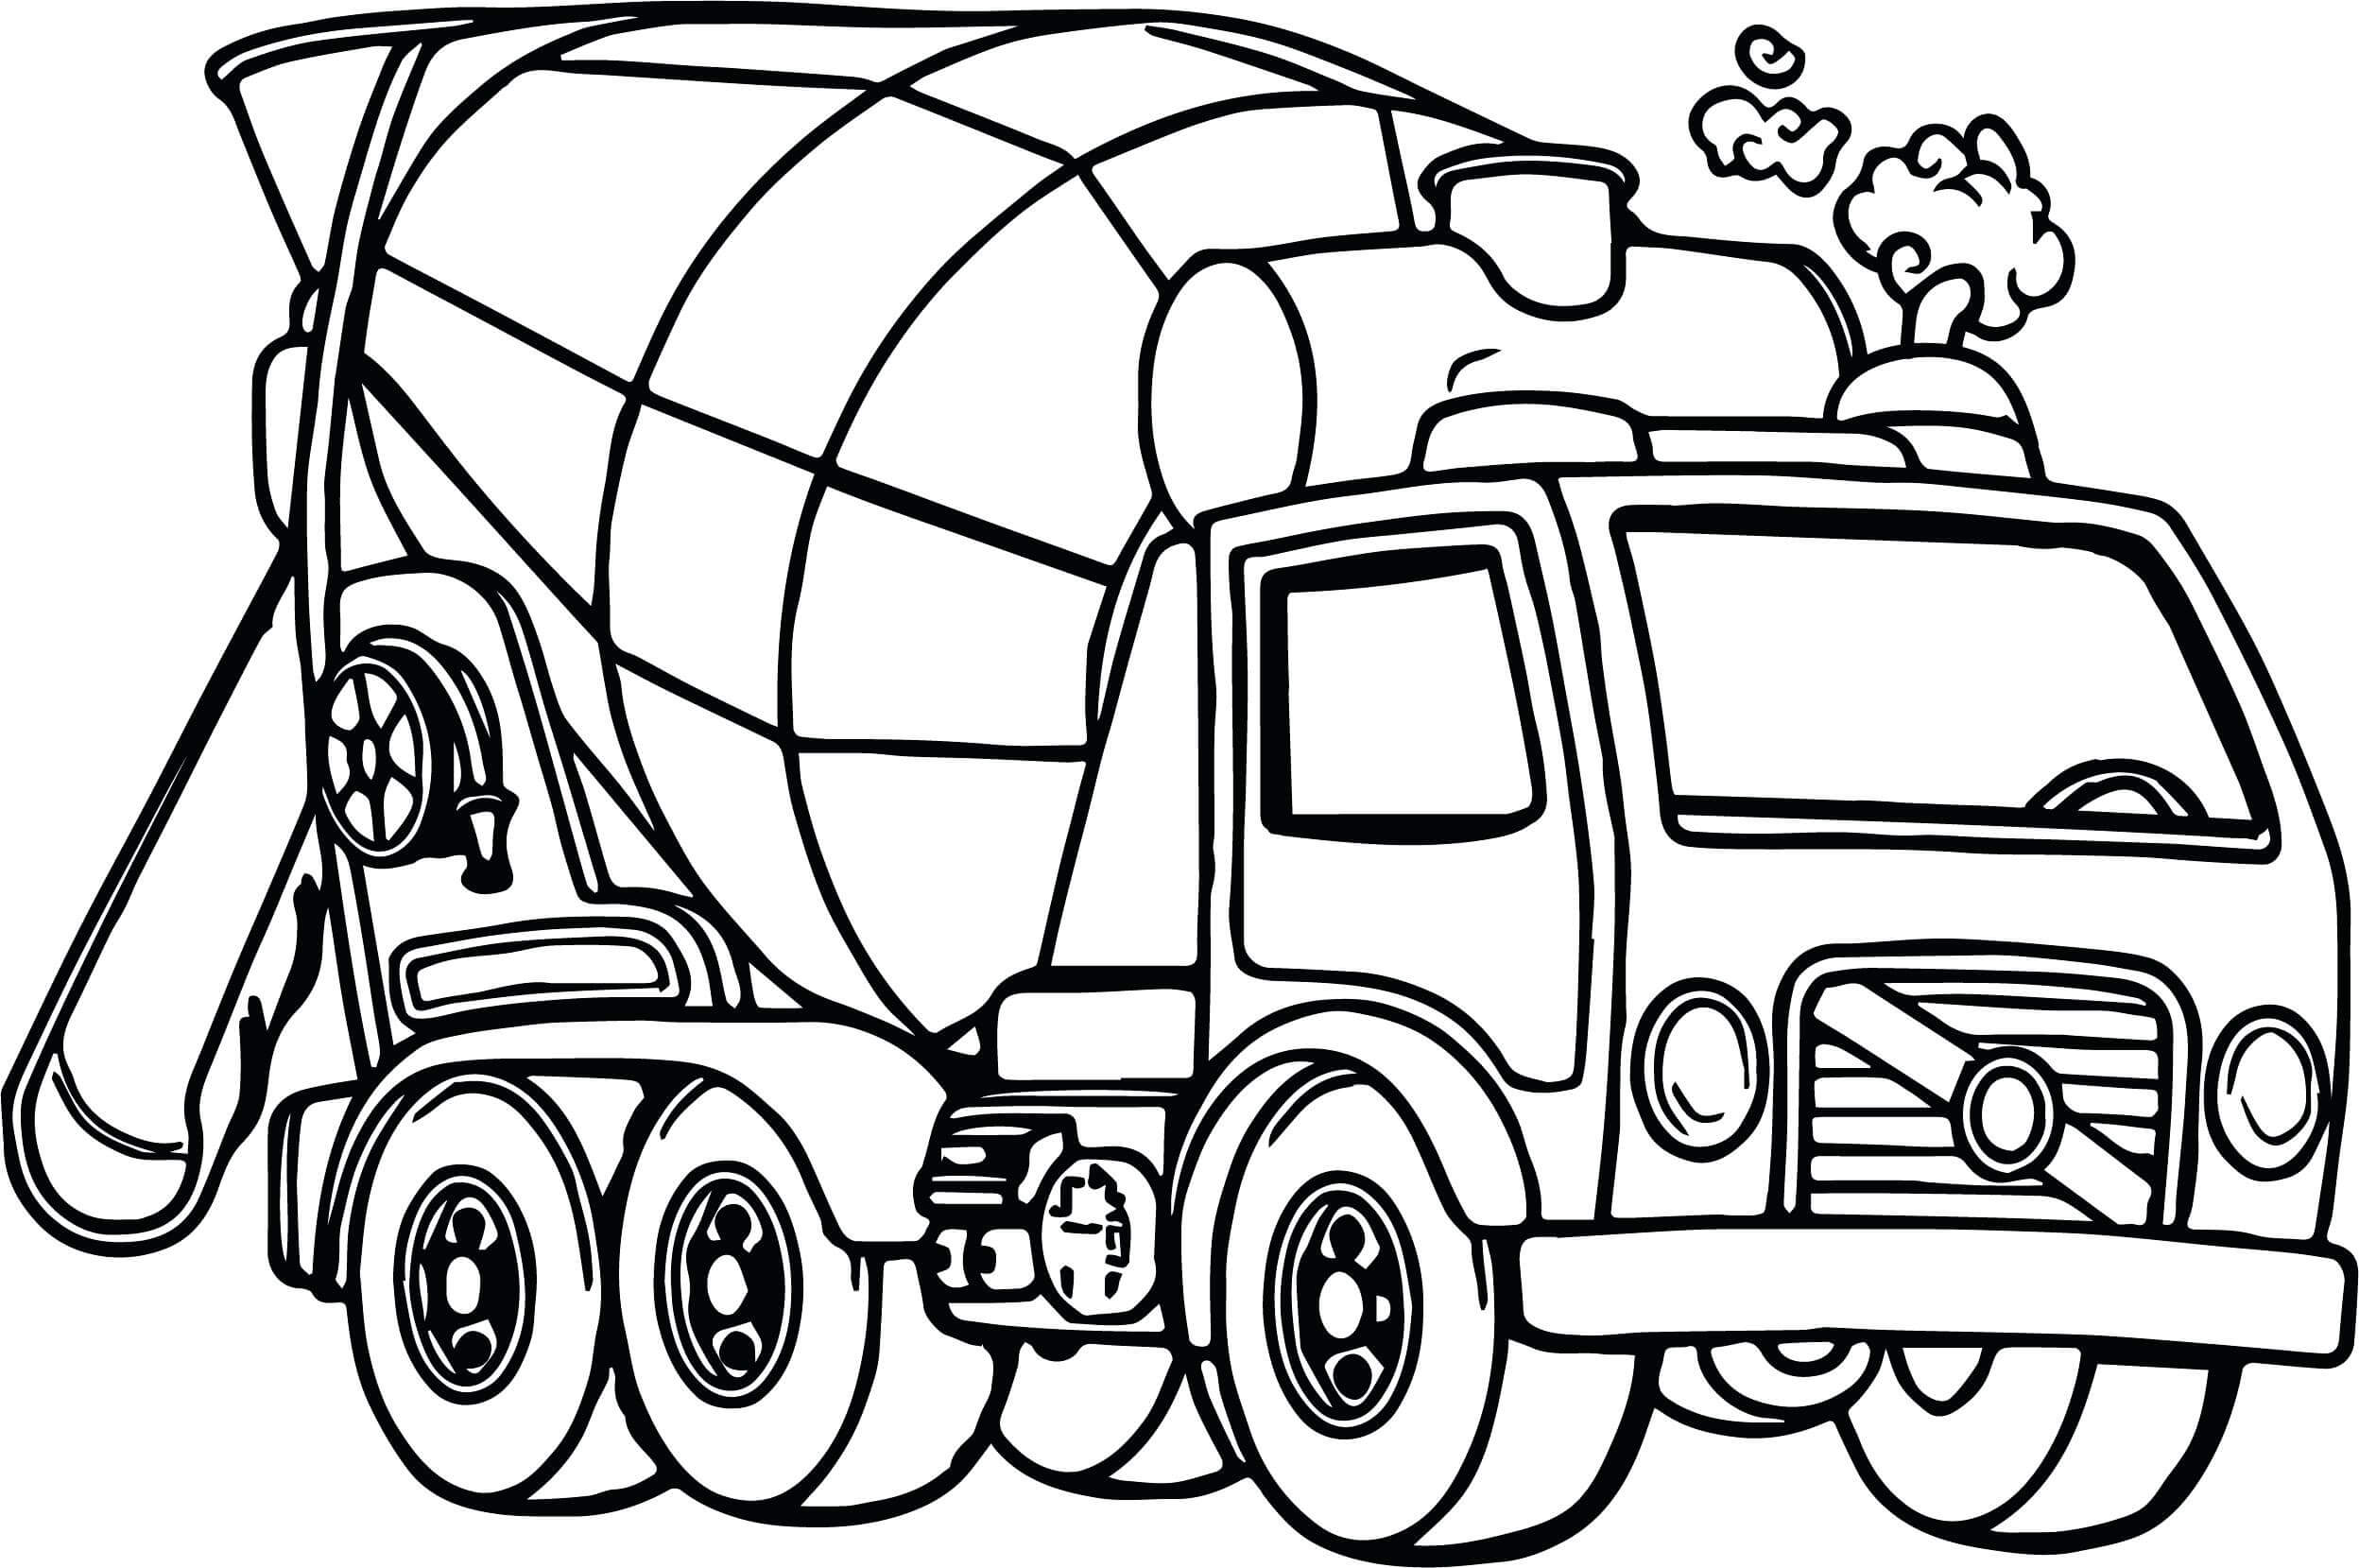 Camion Malaxeur coloring page